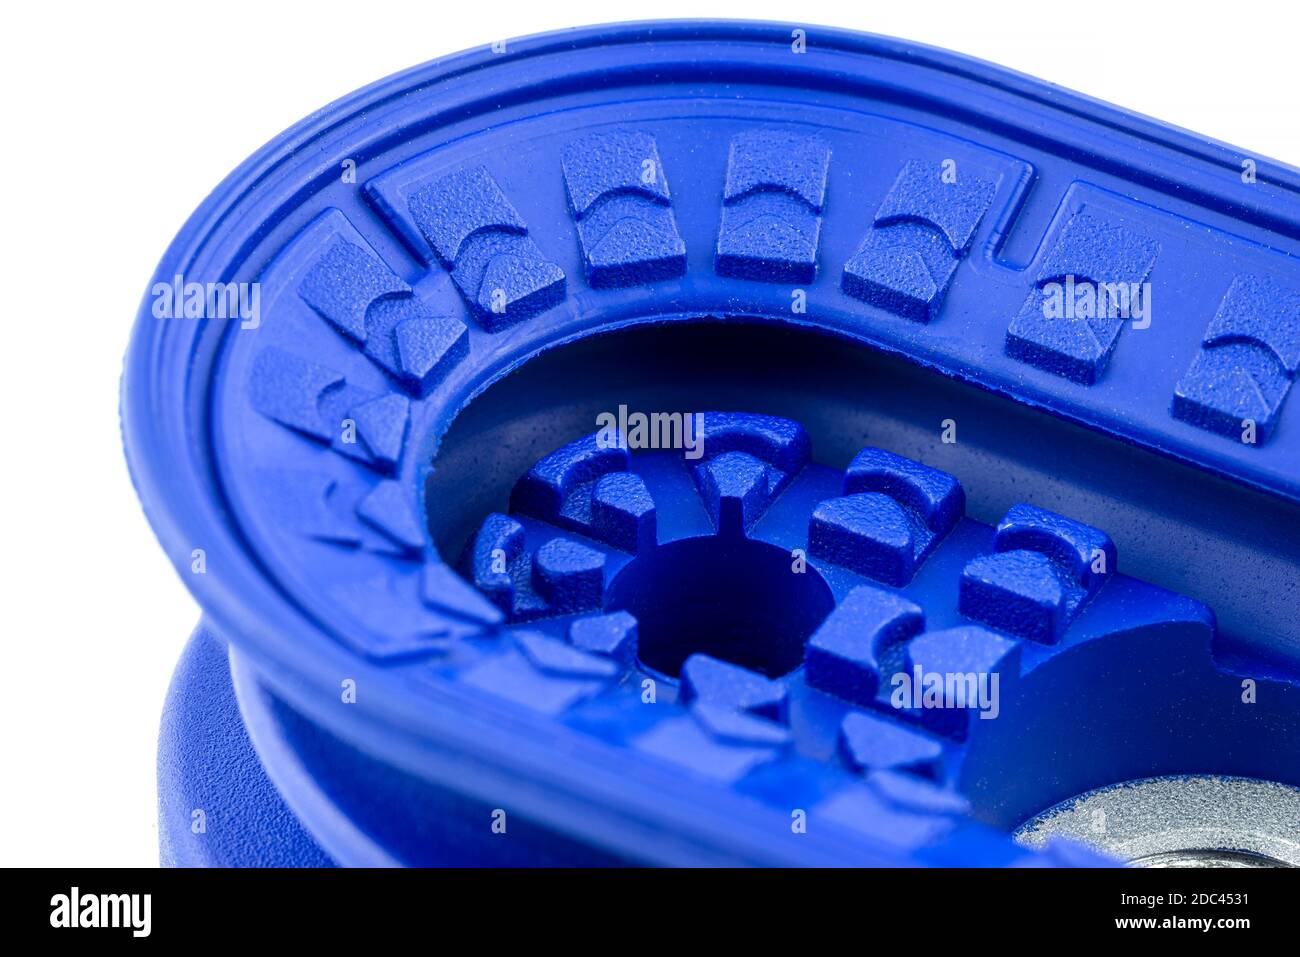 Macro shot of a blue bellows suction cup used in the robotic industry, isolated on a white background. Stock Photo